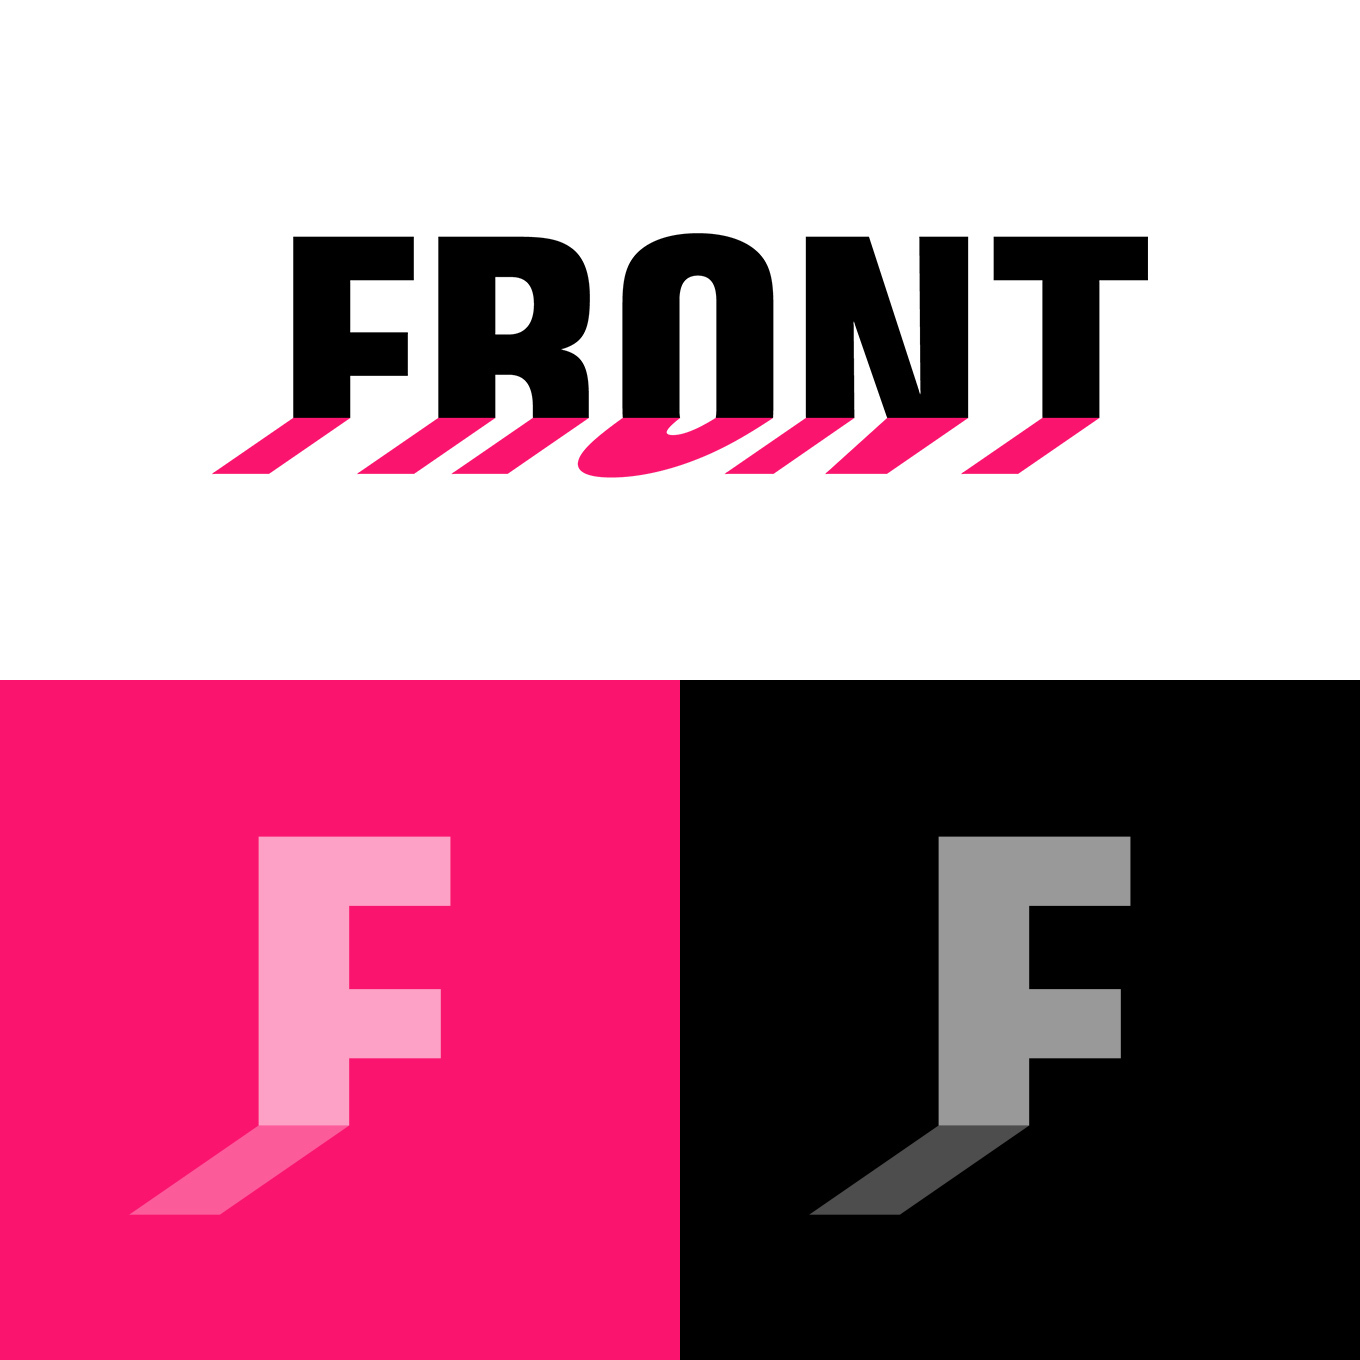 Logo design for FRONT International, shown as a logotype on white background and as a monogram on colored backgrounds